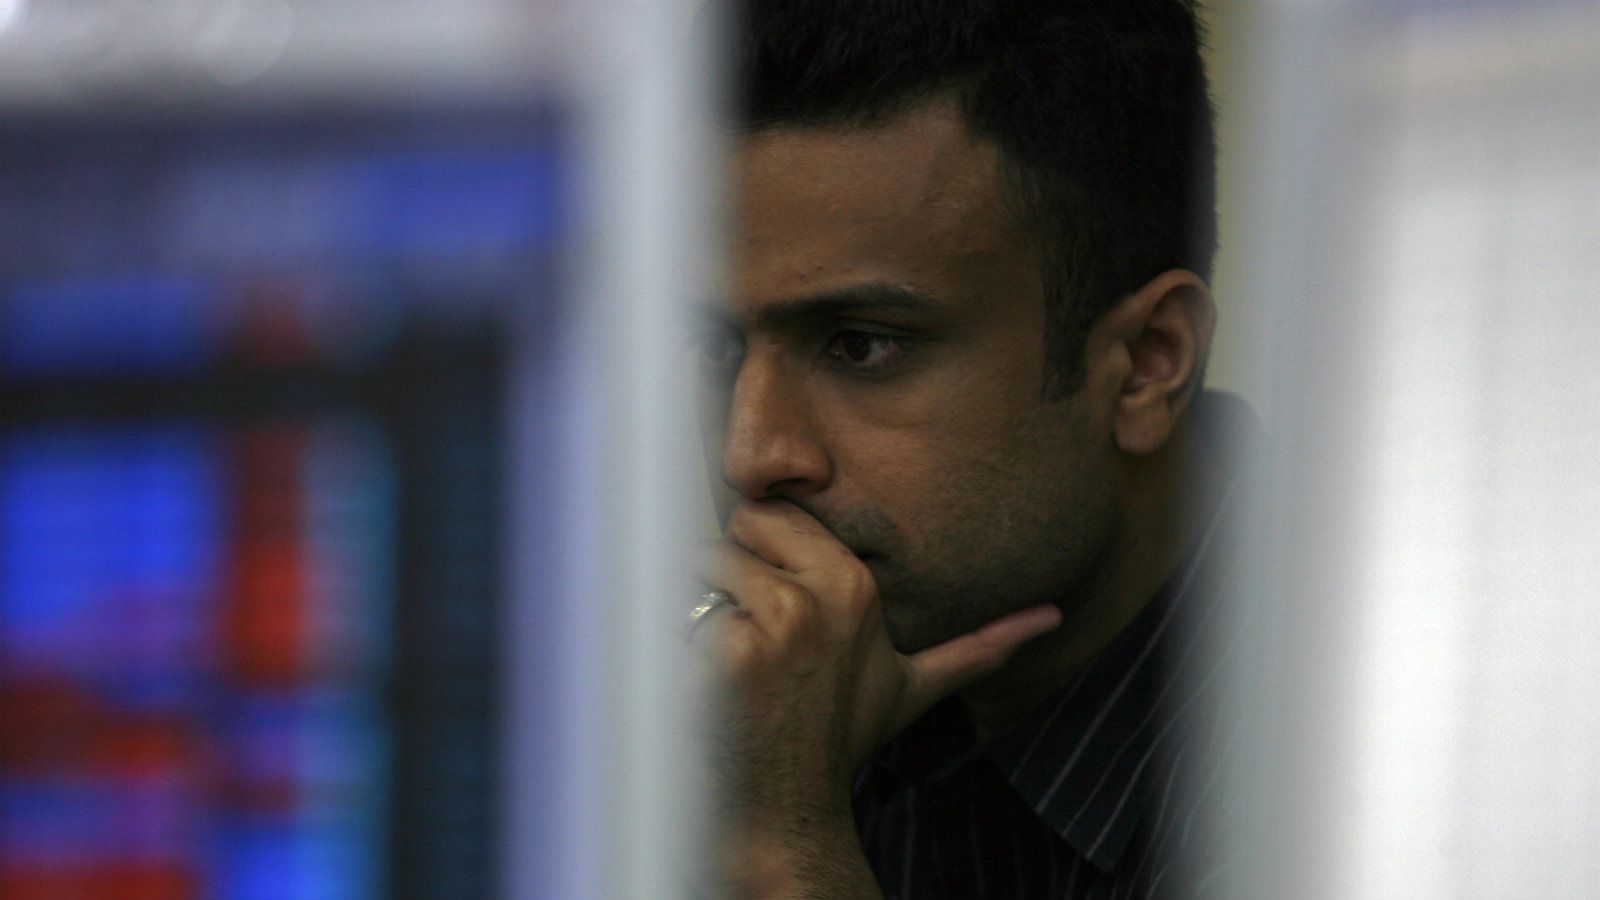 A broker reacts while trading at a brokerage firm in Mumbai November 27, 2009. India shares extended losses to 3 percent by late morning on Friday, with banks leading the fall, as Dubai's debt worries raised concerns about the global financial system and rattled markets across Europe and Asia.